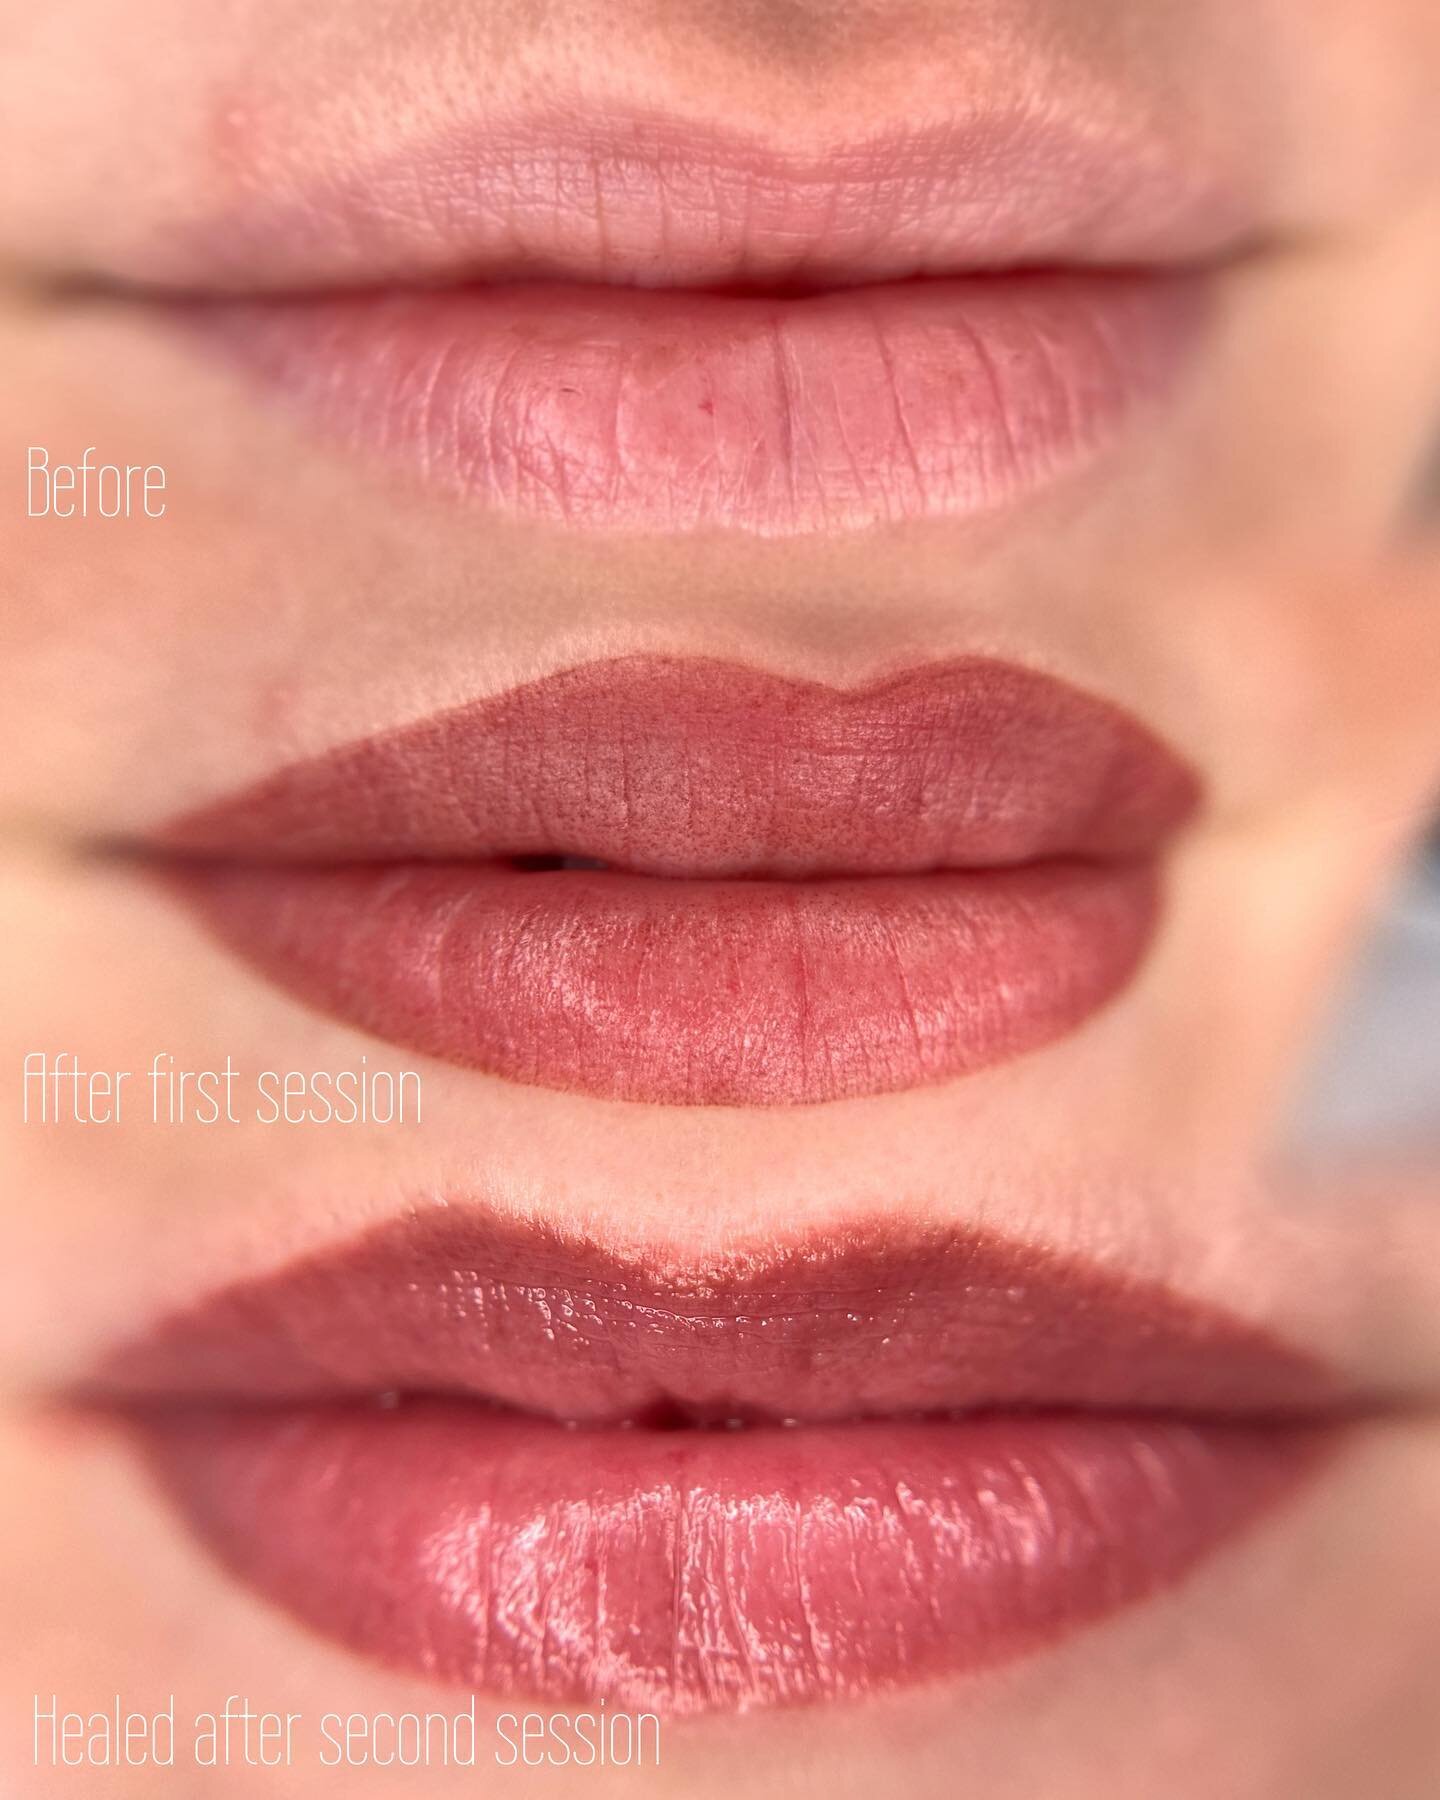 The building process of Lip Blush 🌹 Before, immediately after first session, and healed results after 2 sessions of tattooing. With a little patience and trust in the process, we can reach the results of your dreams 👼🏼☁️🍒 
.
.
.
.
.
.
#lipblush #